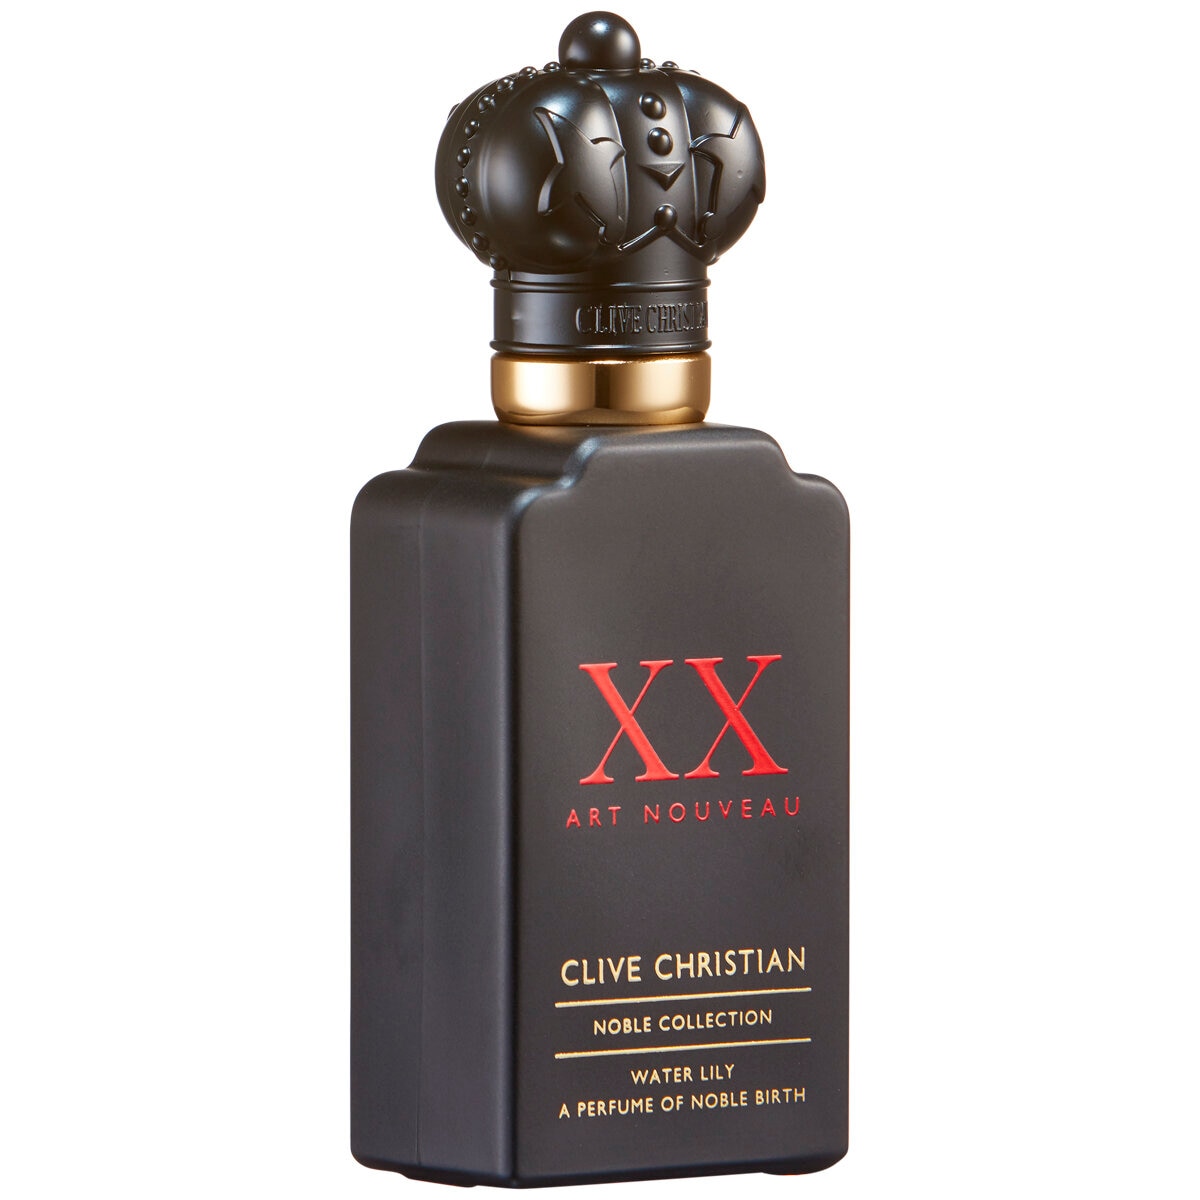 Clive Christian Womens Noble Collection XX Art Nouveau Water Lily Perfume Spray 50ml